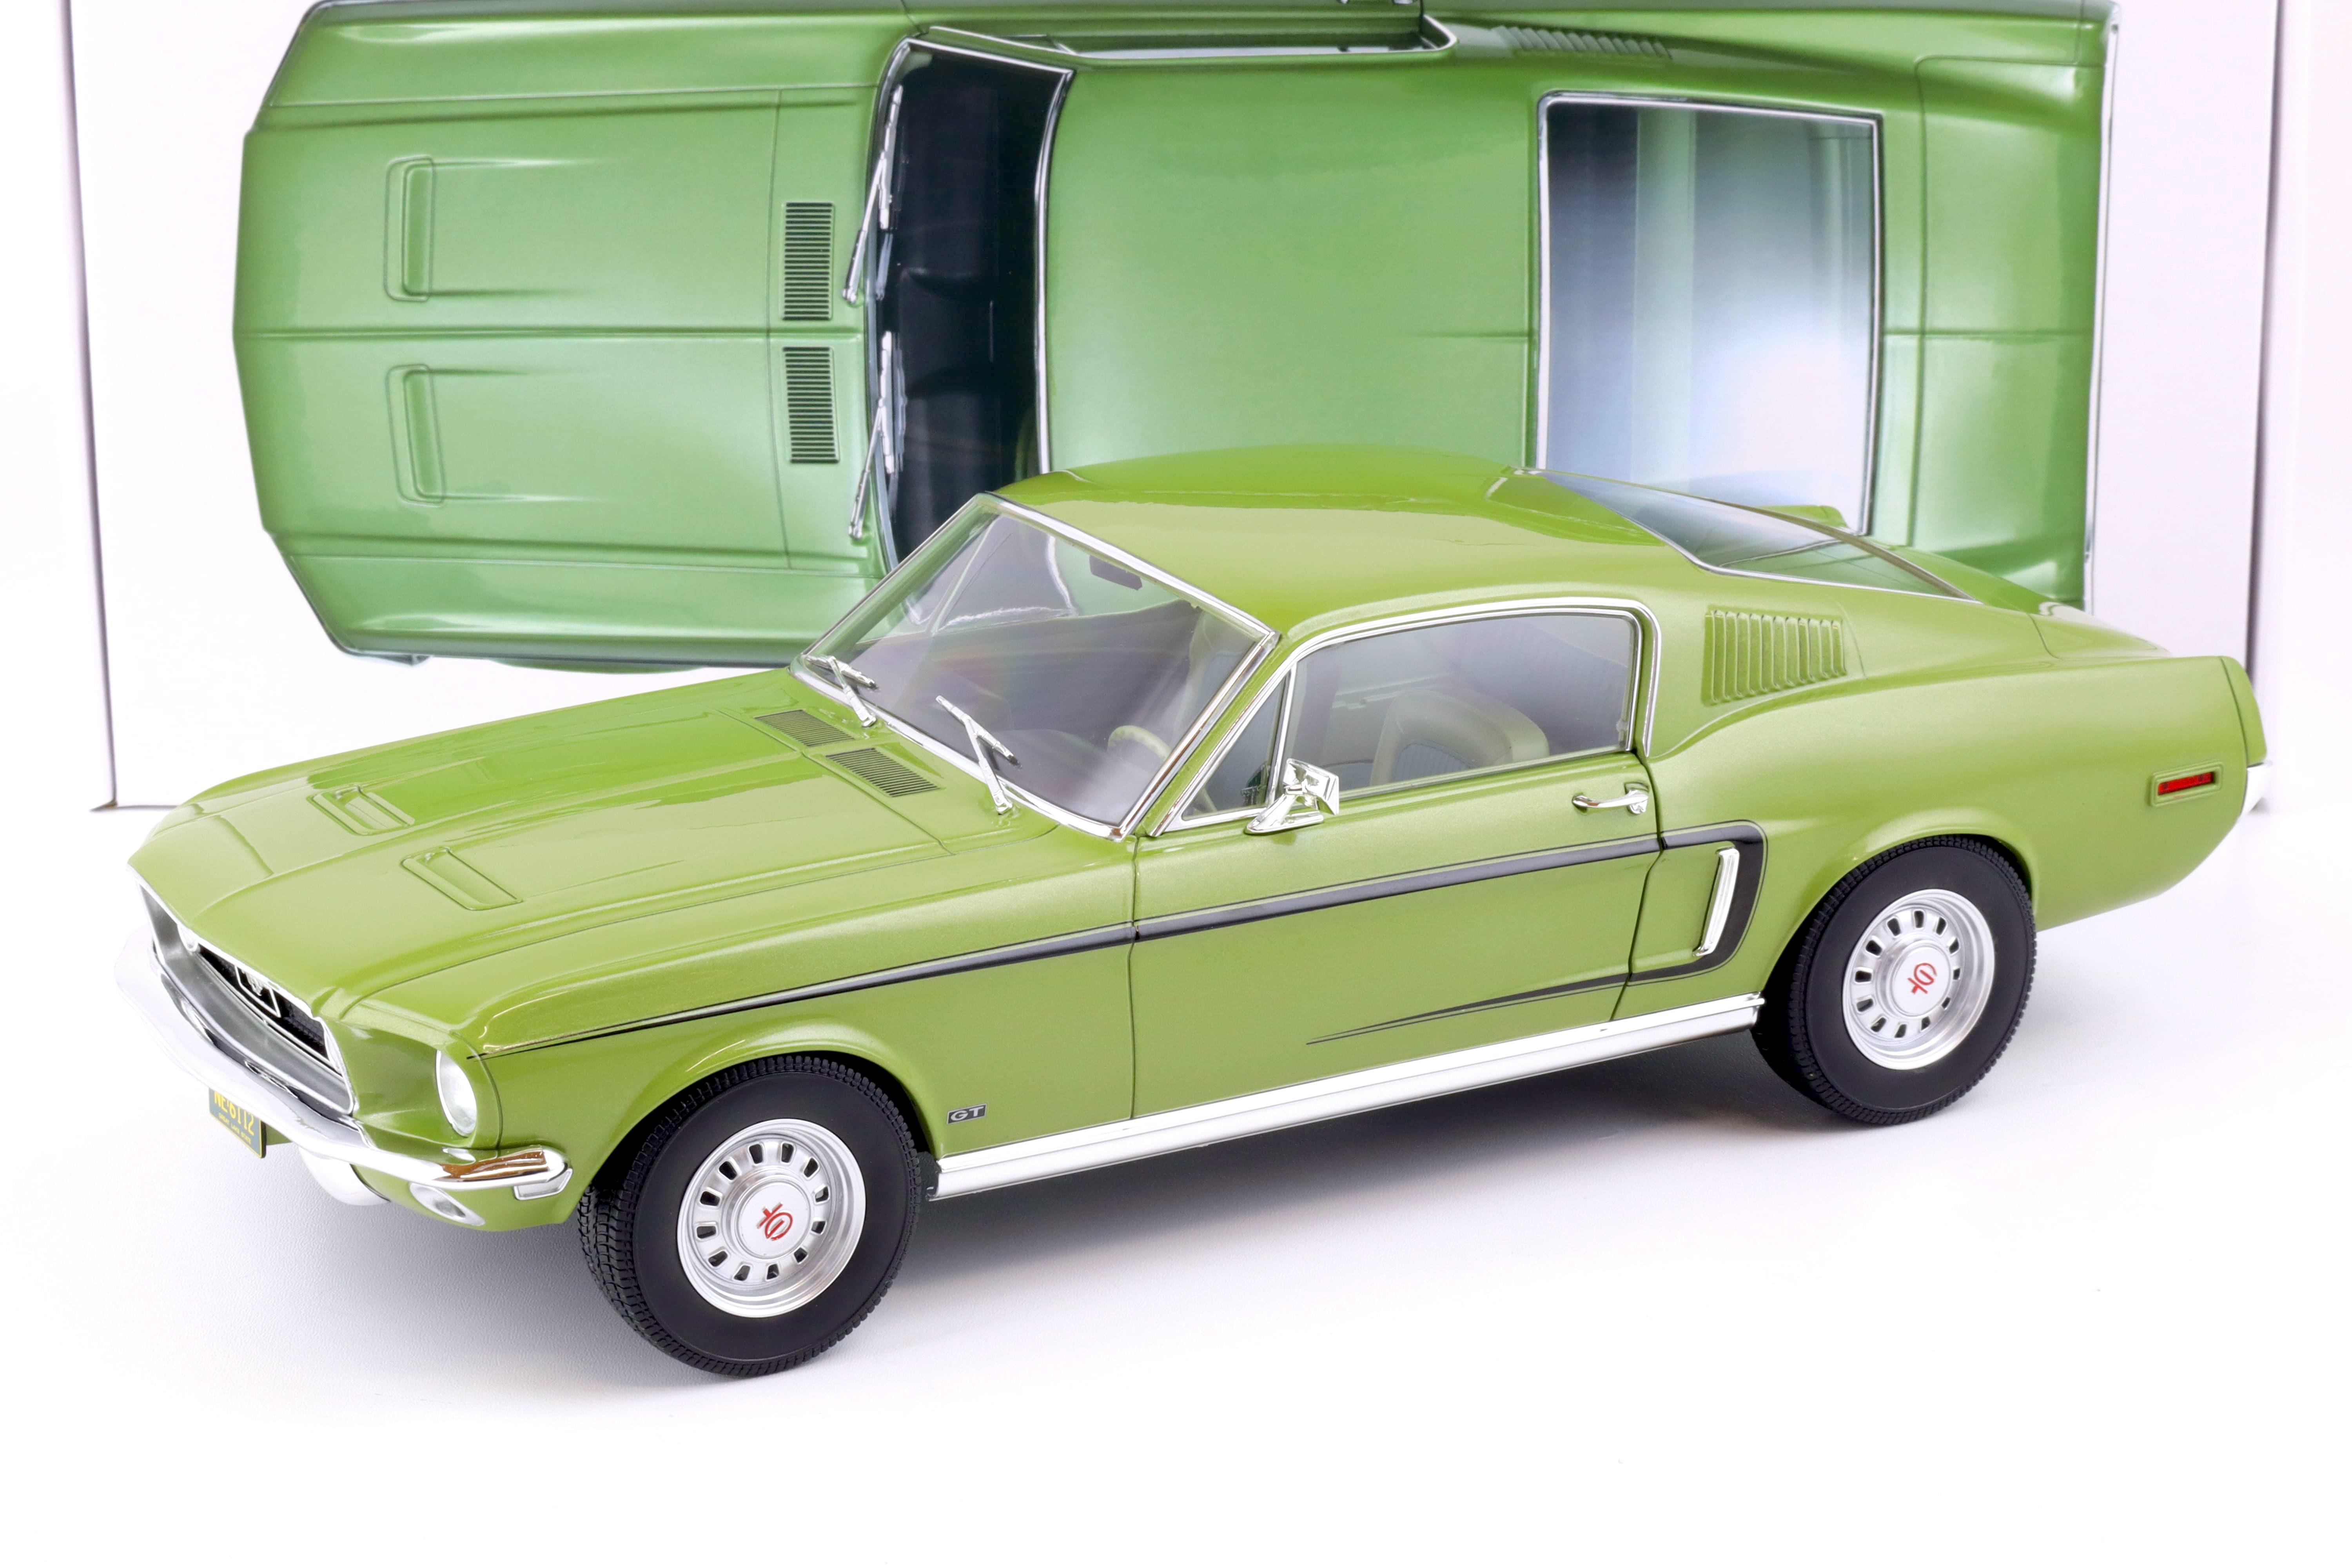 1:12 Norev Ford Mustang Fastback GT Coupe 1968 light green metallic 122704